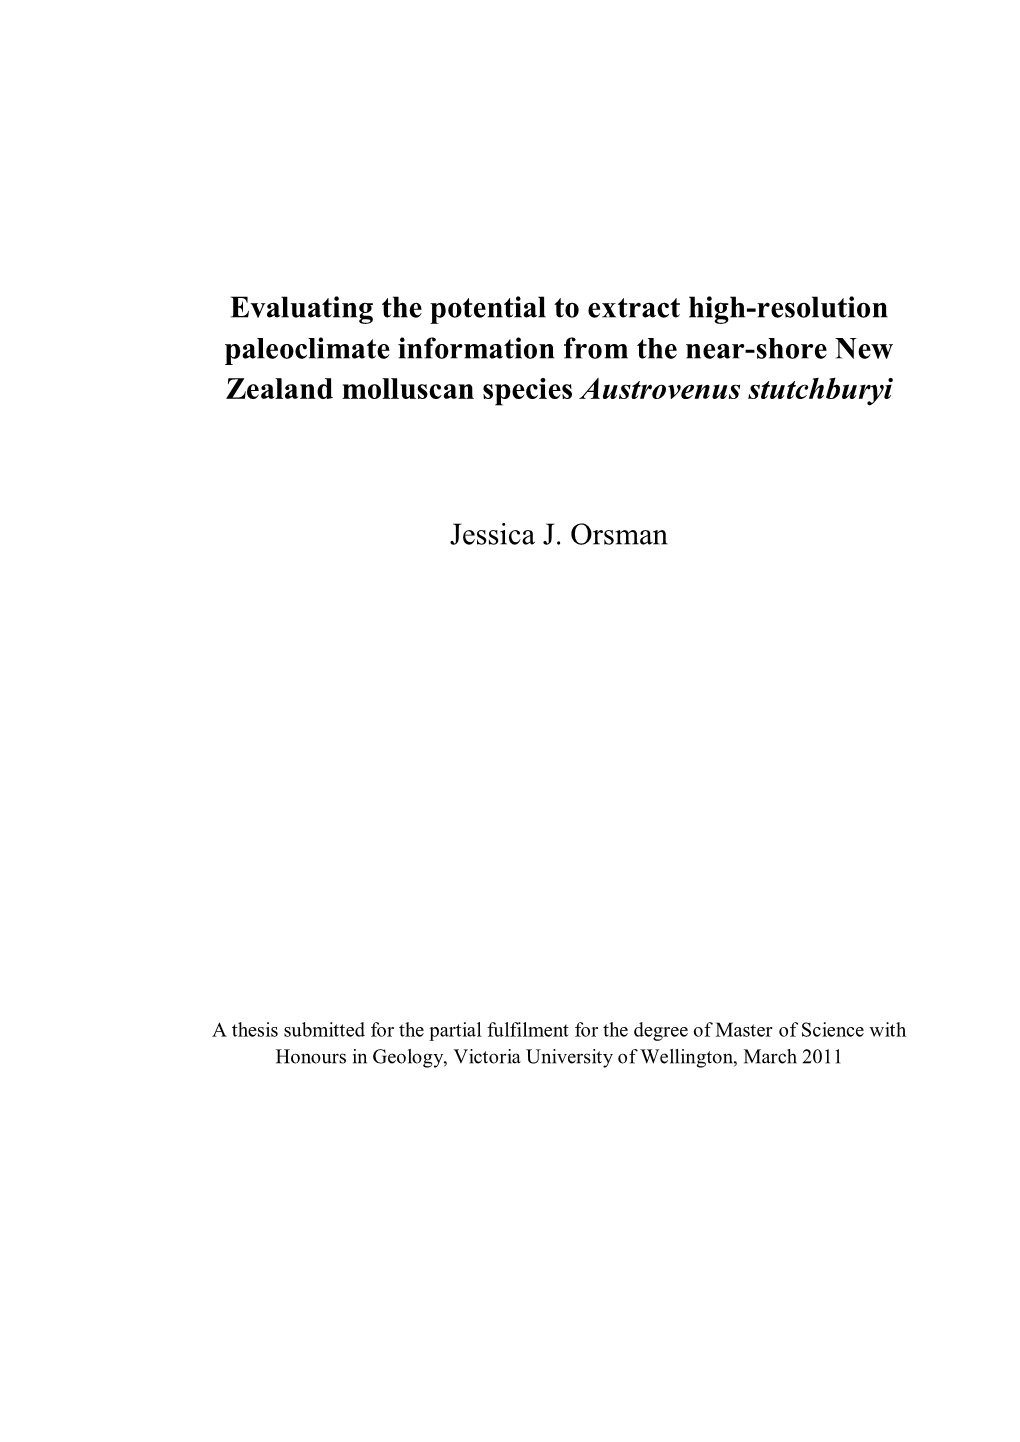 Evaluating the Potential to Extract High-Resolution Paleoclimate Information from the Near-Shore New Zealand Molluscan Species Austrovenus Stutchburyi